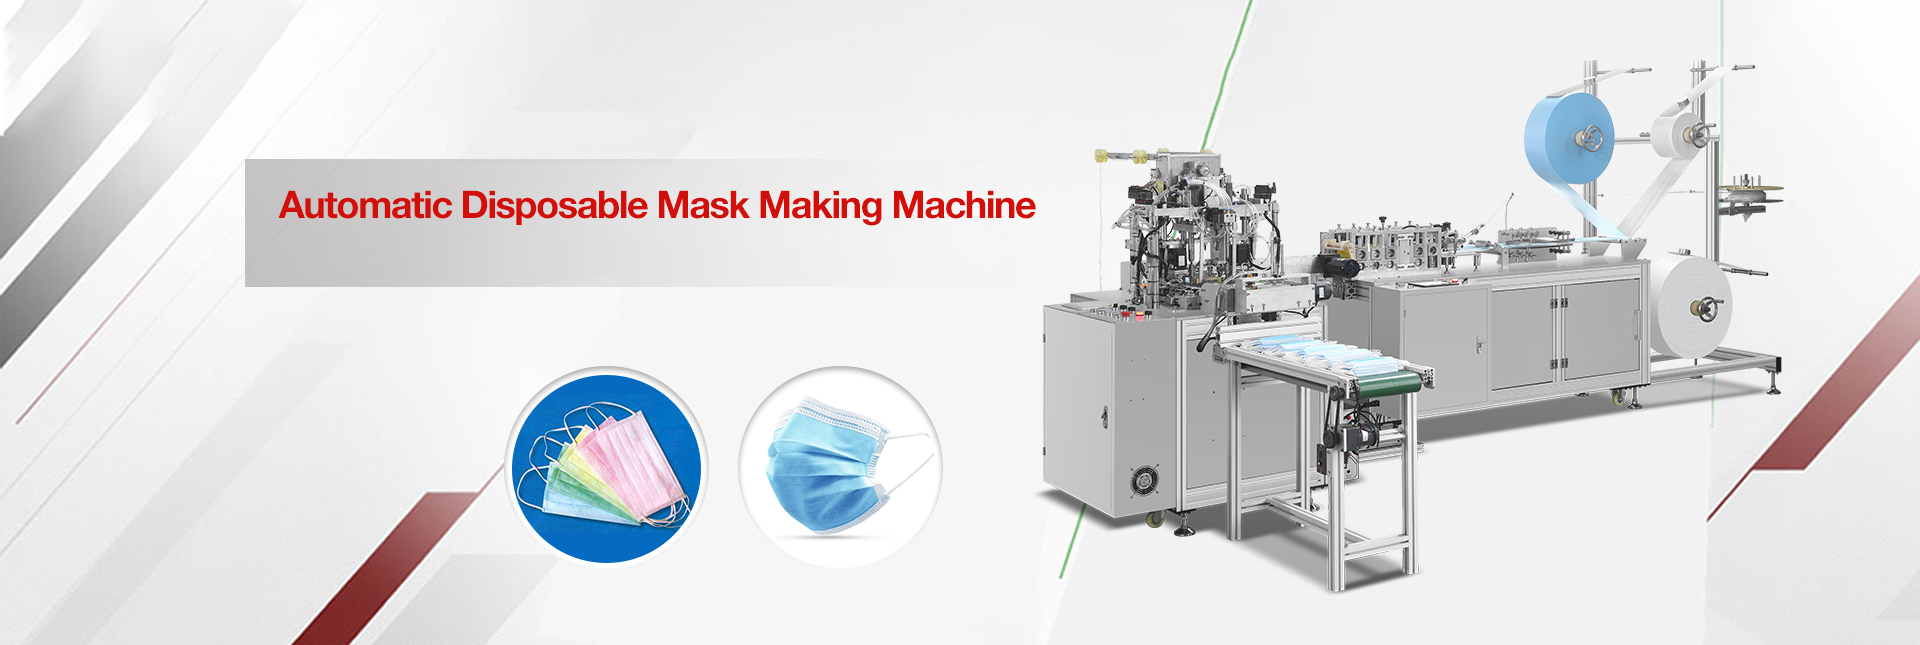 High Speed Automatic Disposable Mask Making Machine